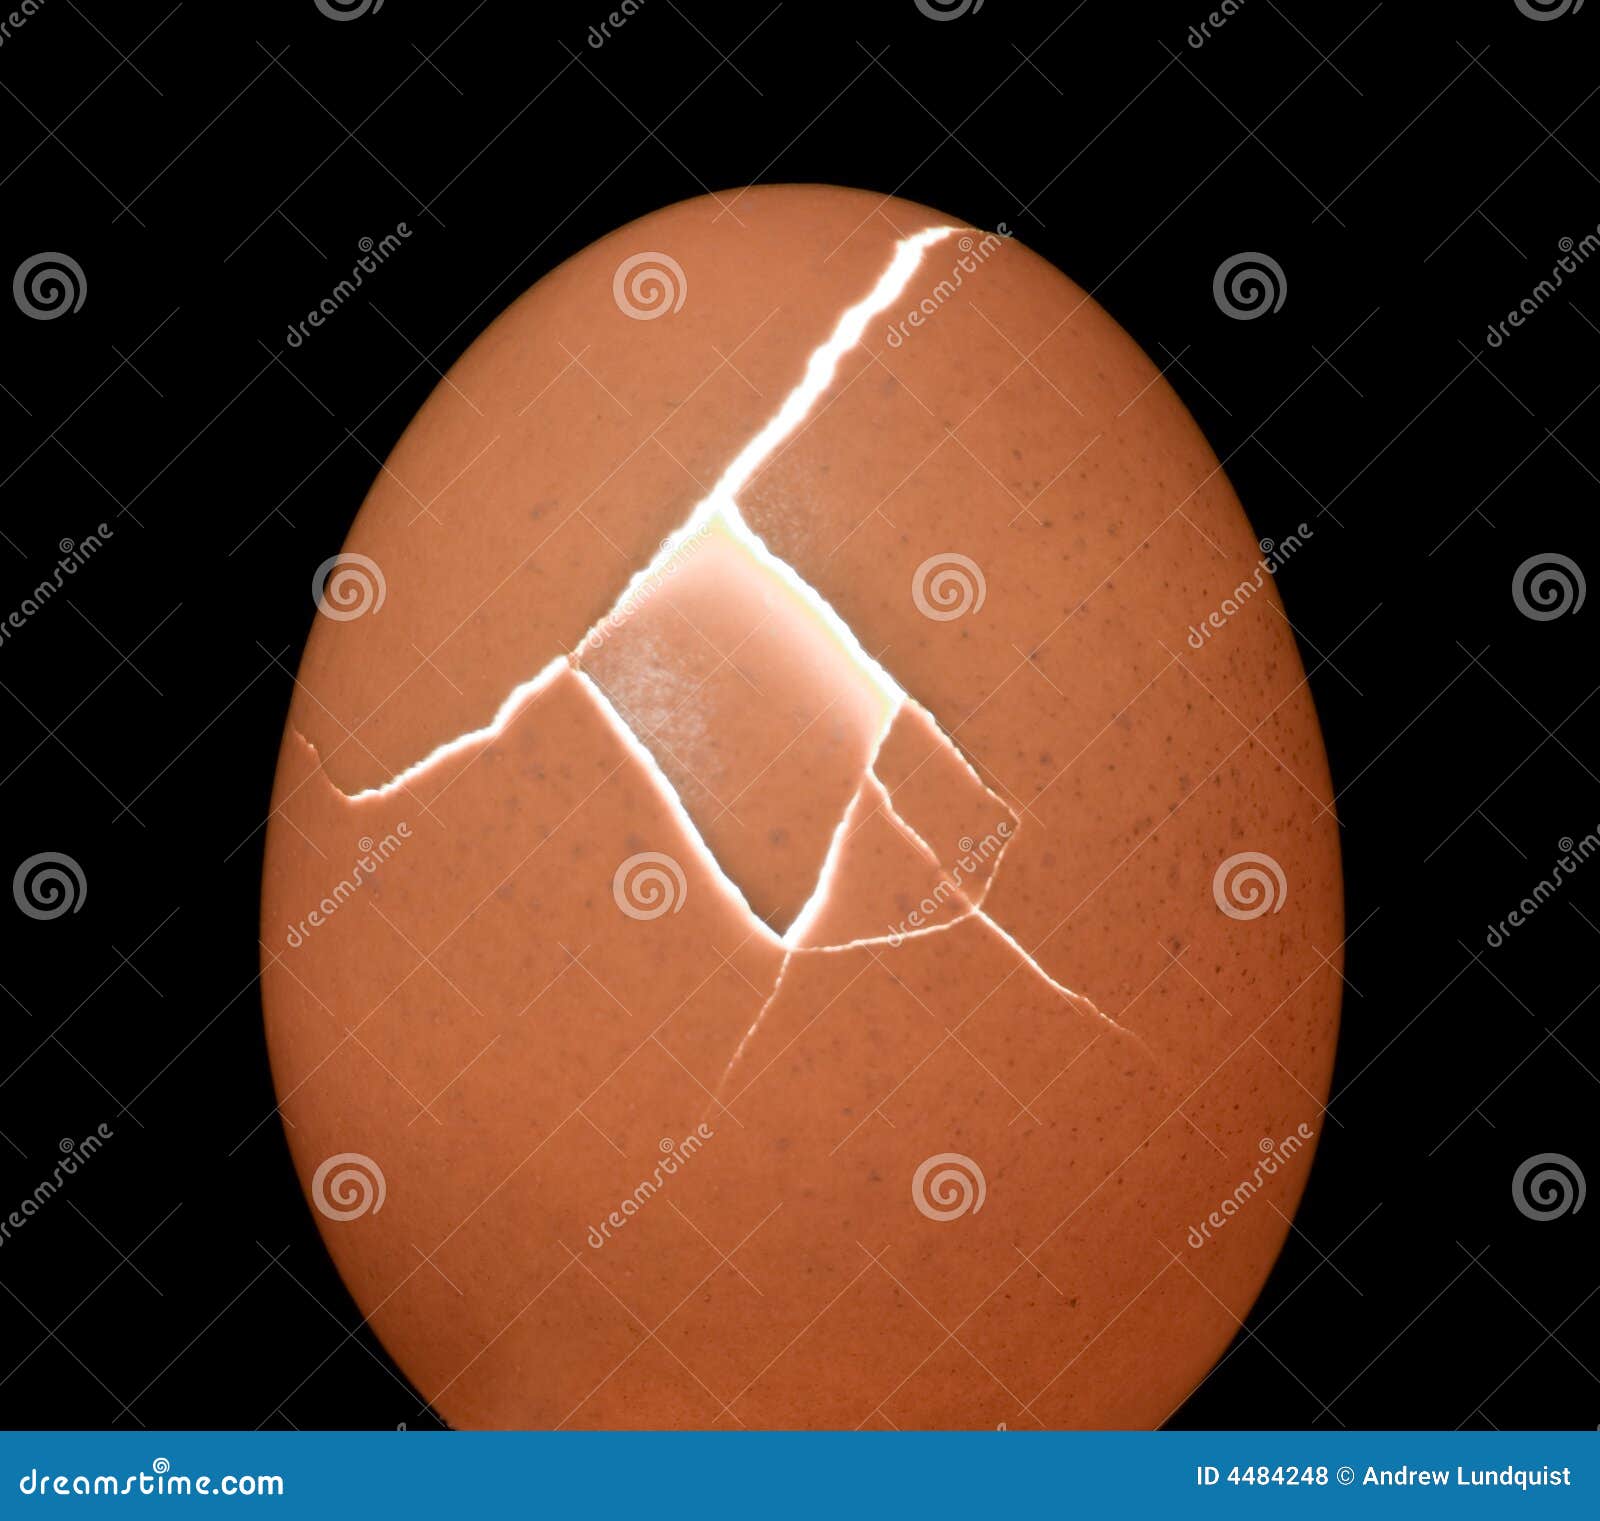 mysterious egg cracking with light